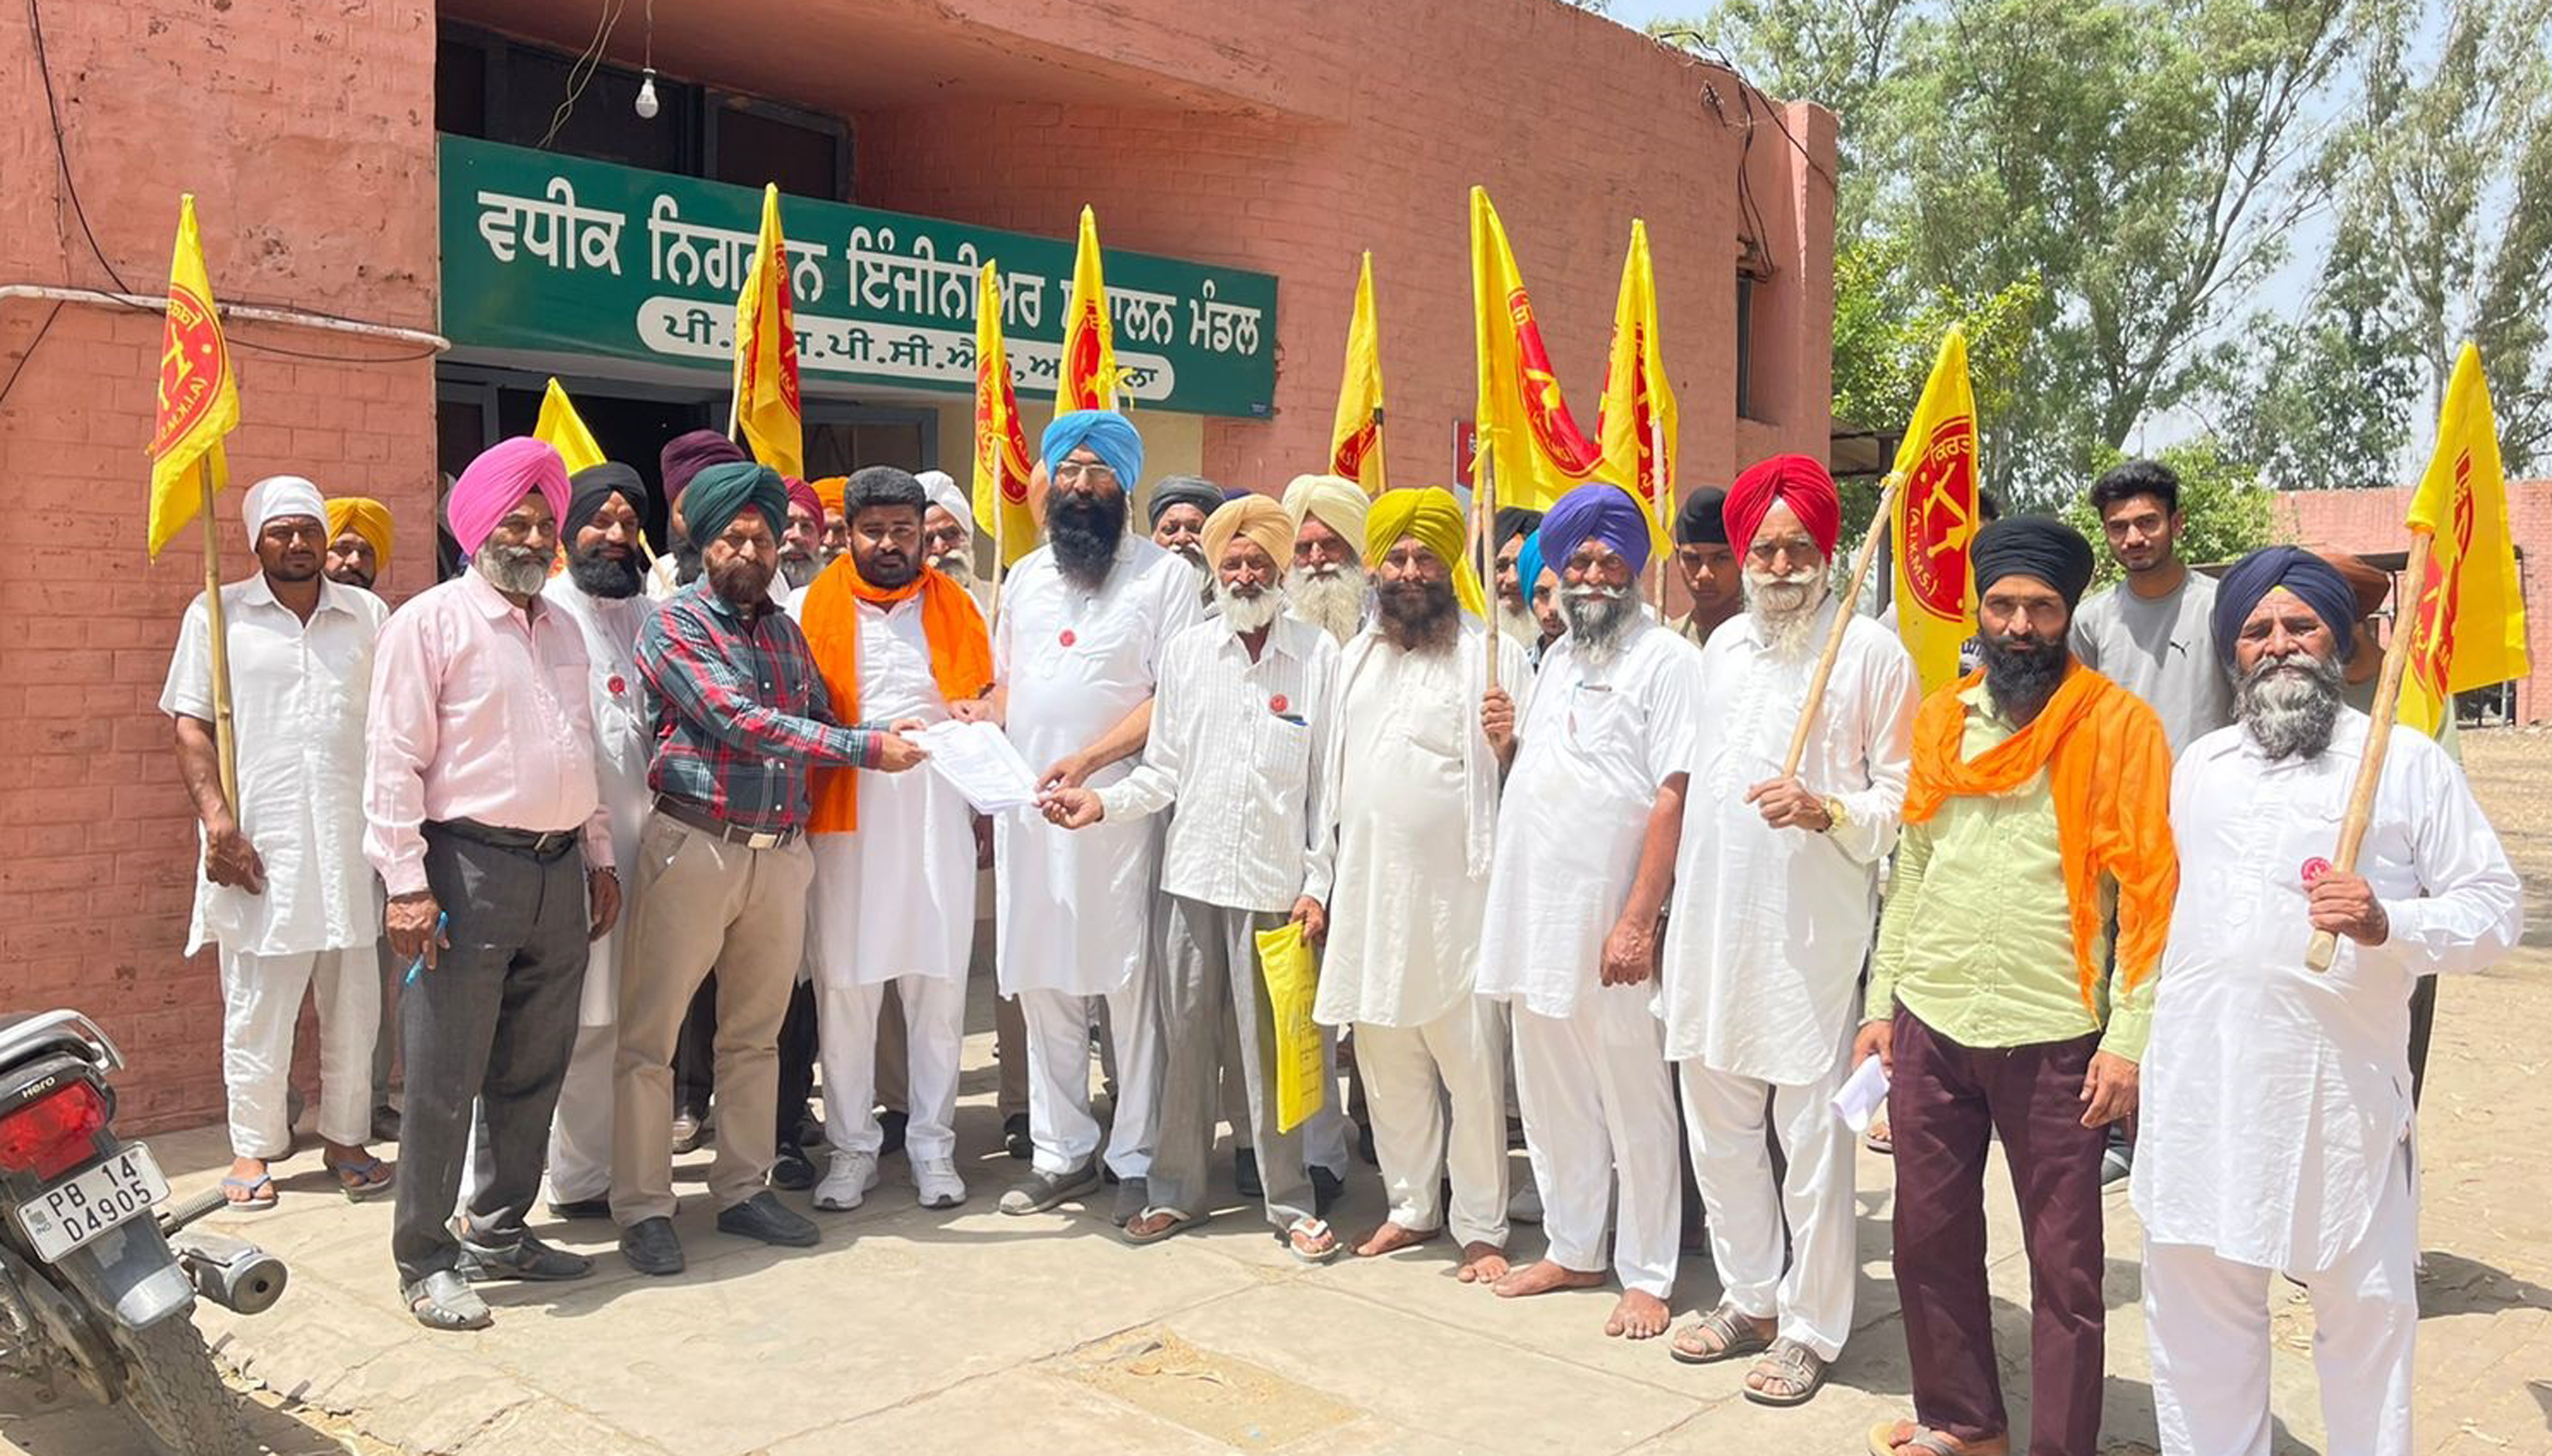 Ruing shortage of power, farmers stage protest outside PSPCL office